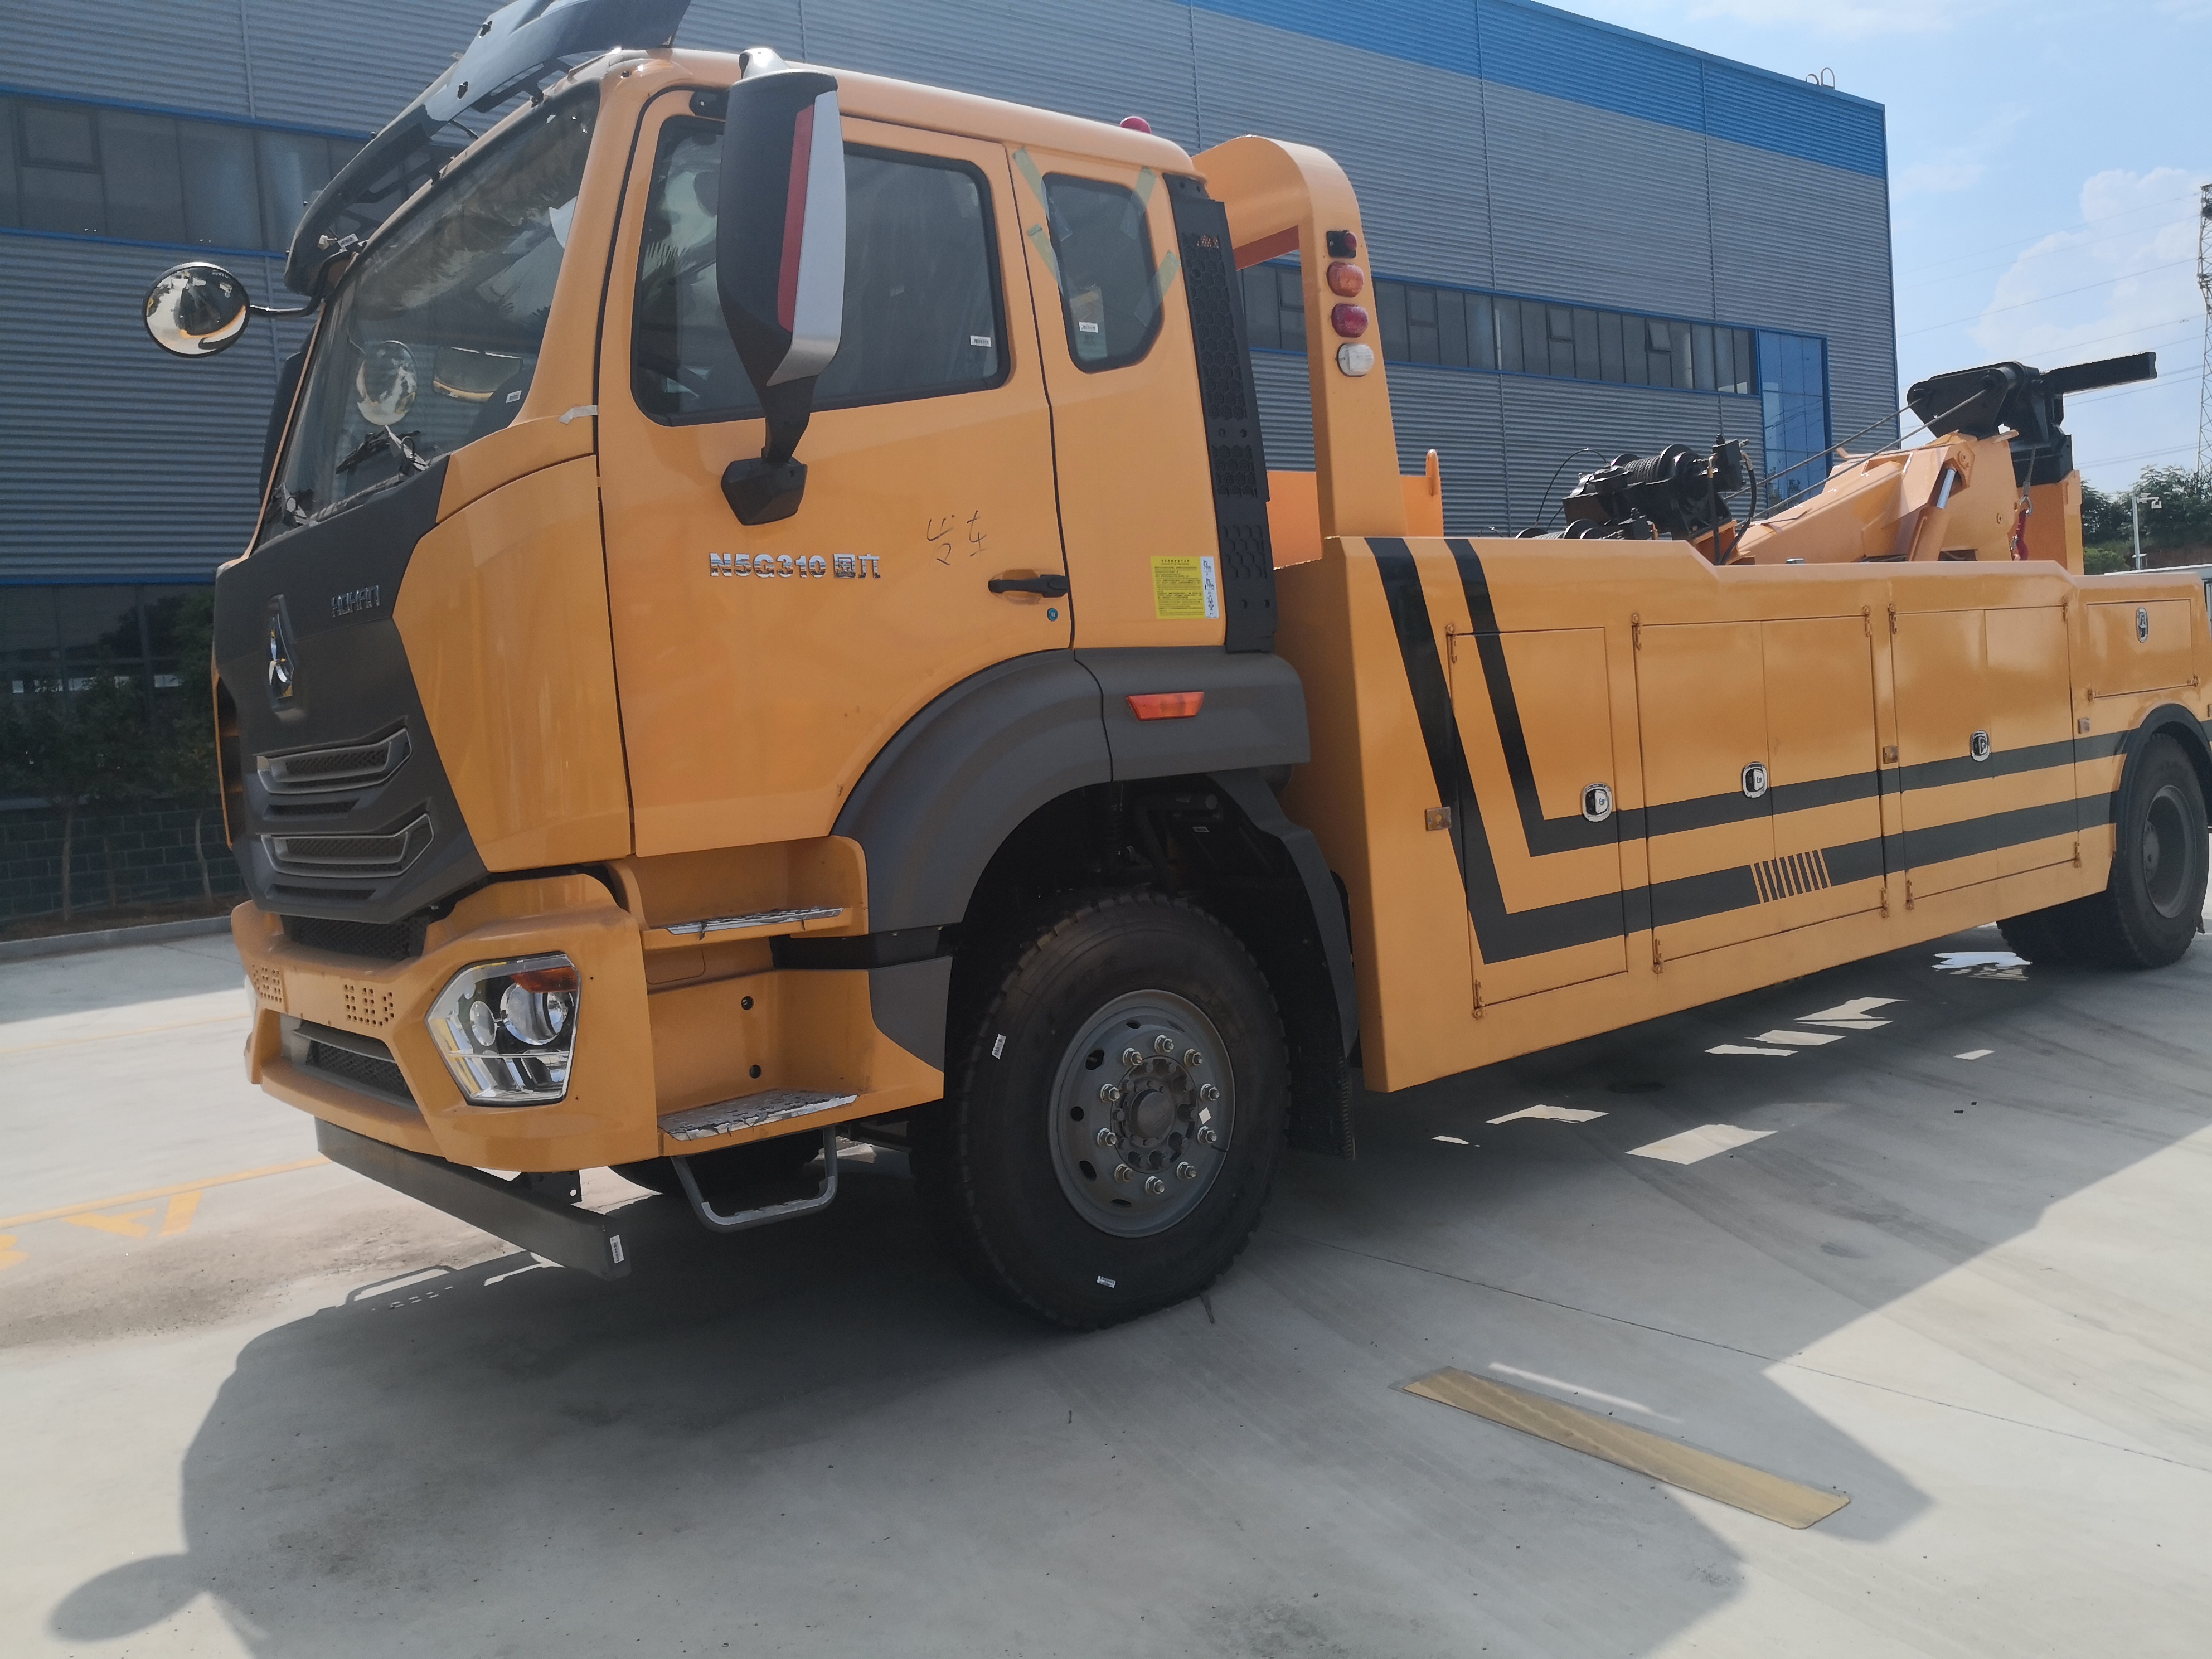 Heavy Duty Road Recovery Wrecker Tow Truck with Crane One-to-one Multipurpose Platform Carrier Sinotruck